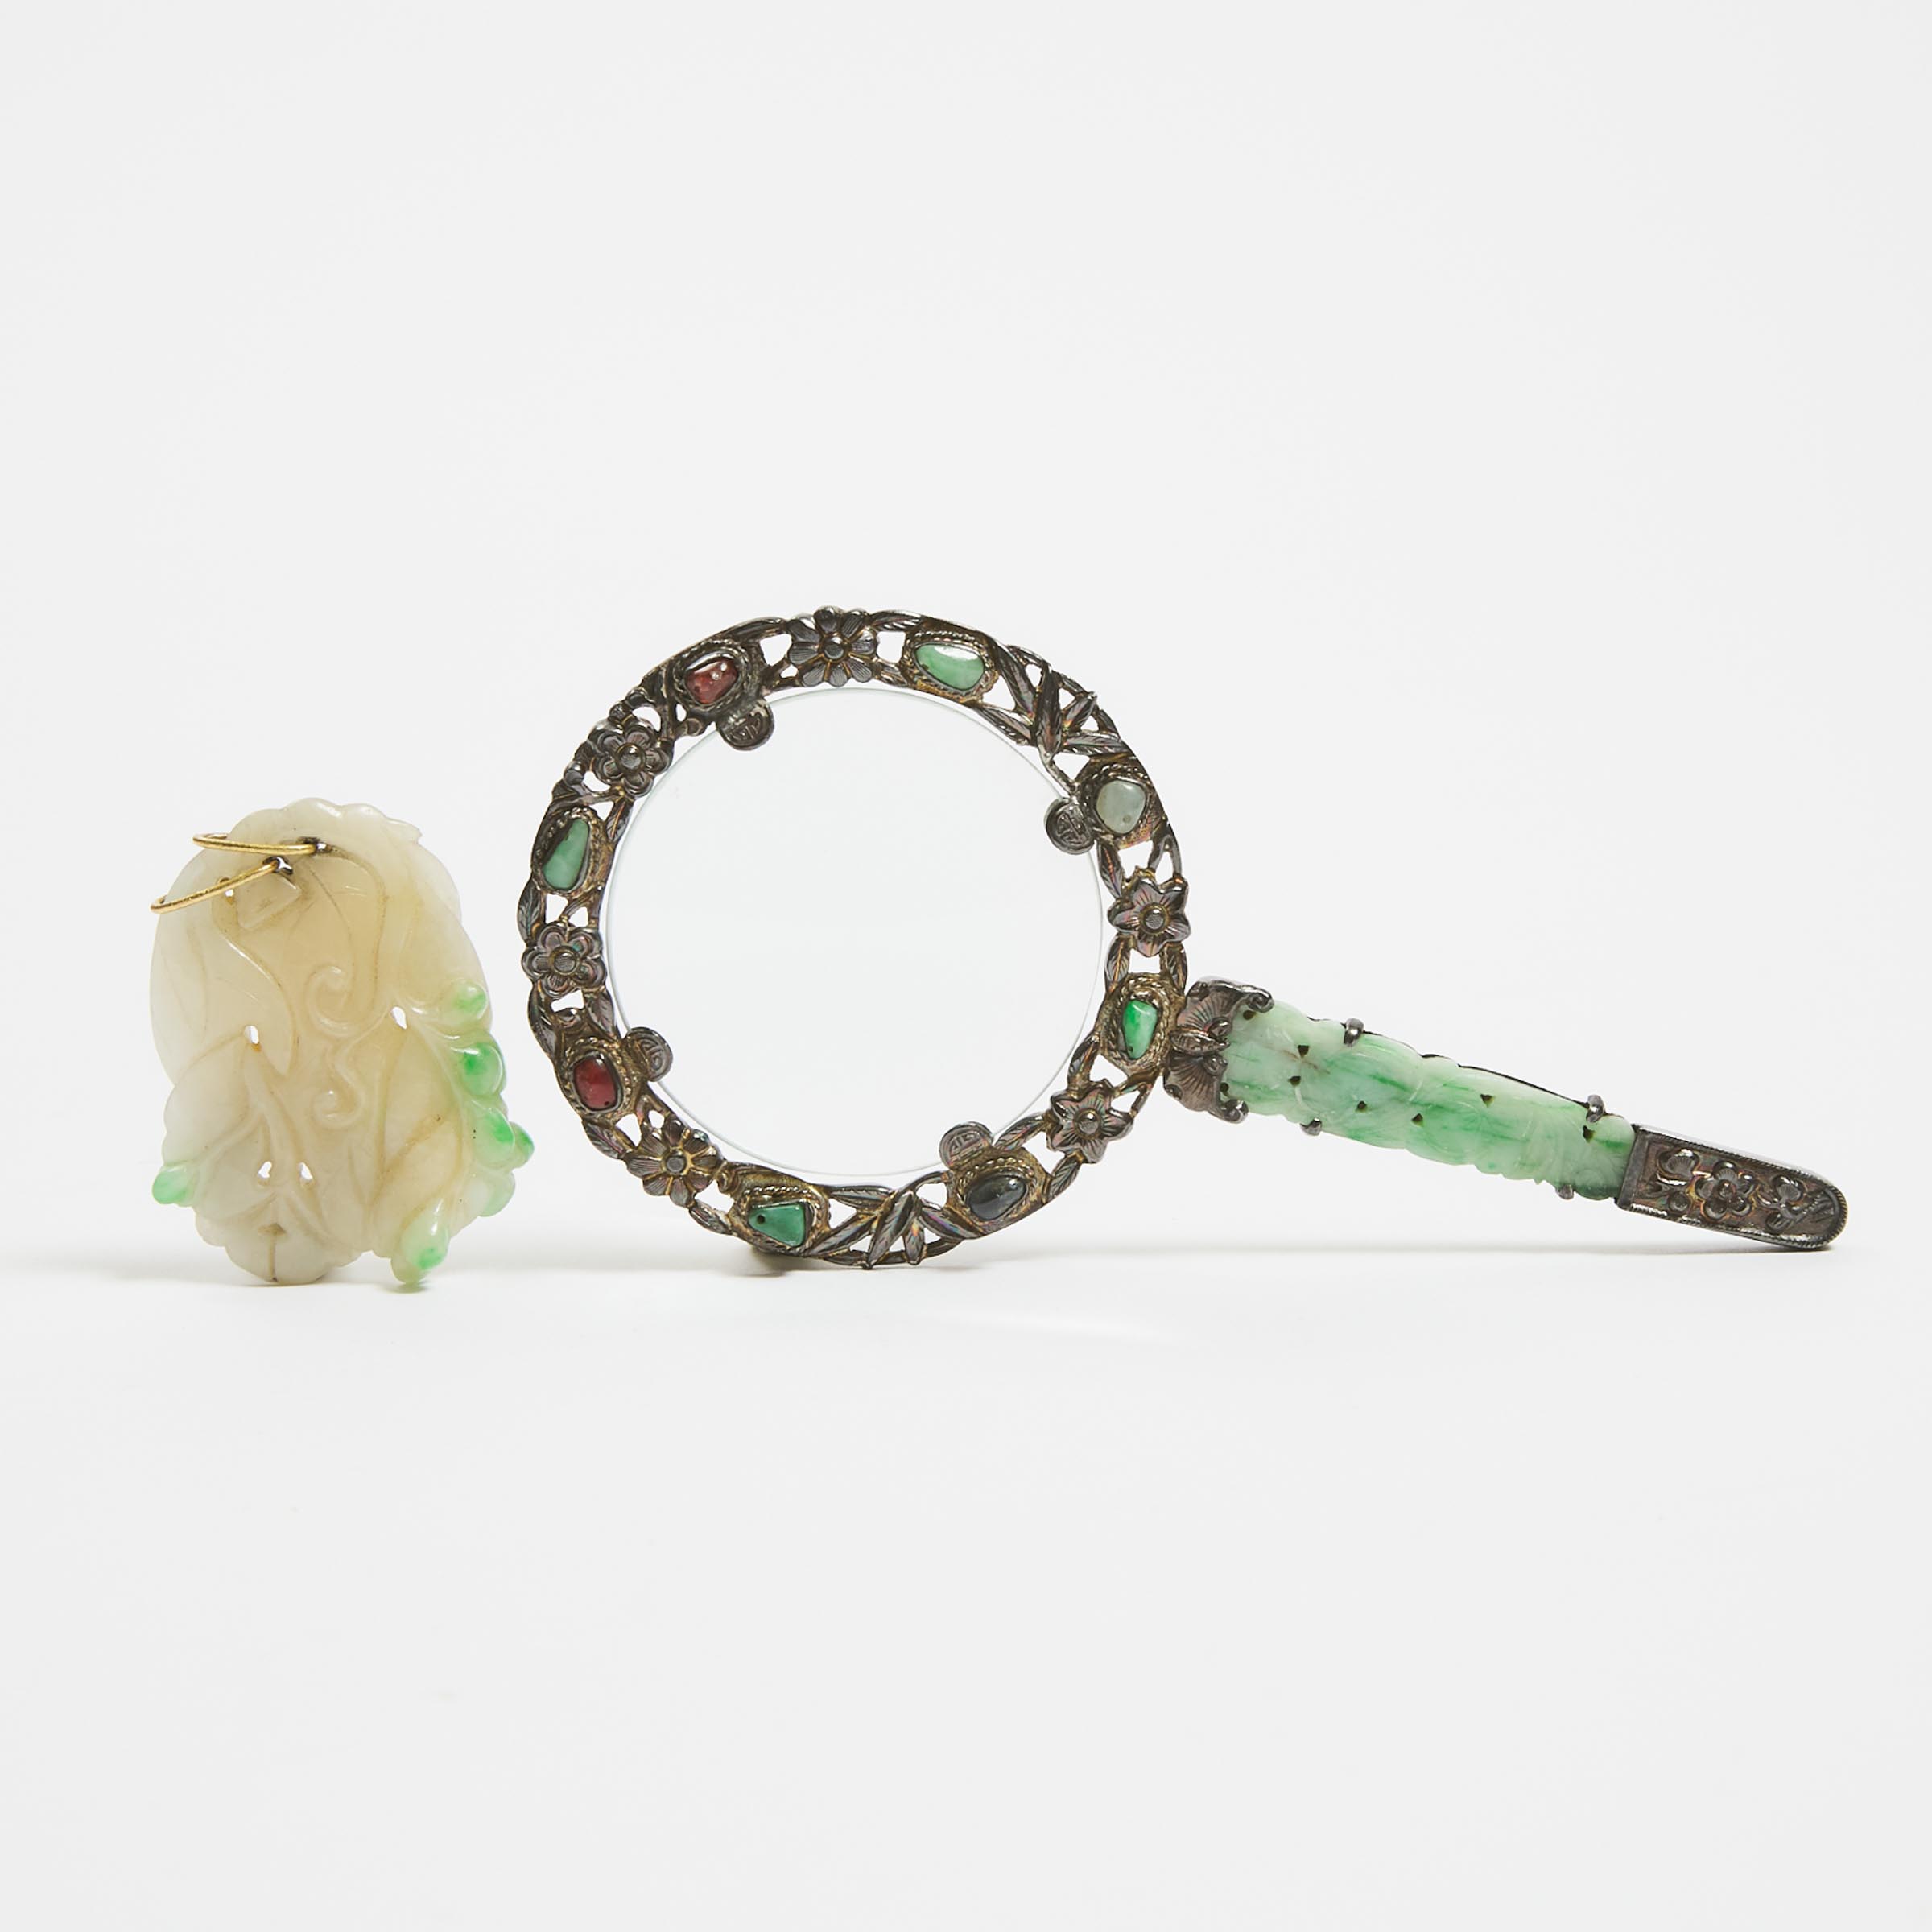 A Jadeite 'Grapes' Pendant, Together With a Jadeite-Mounted Magnifying Glass, Early 20th Century